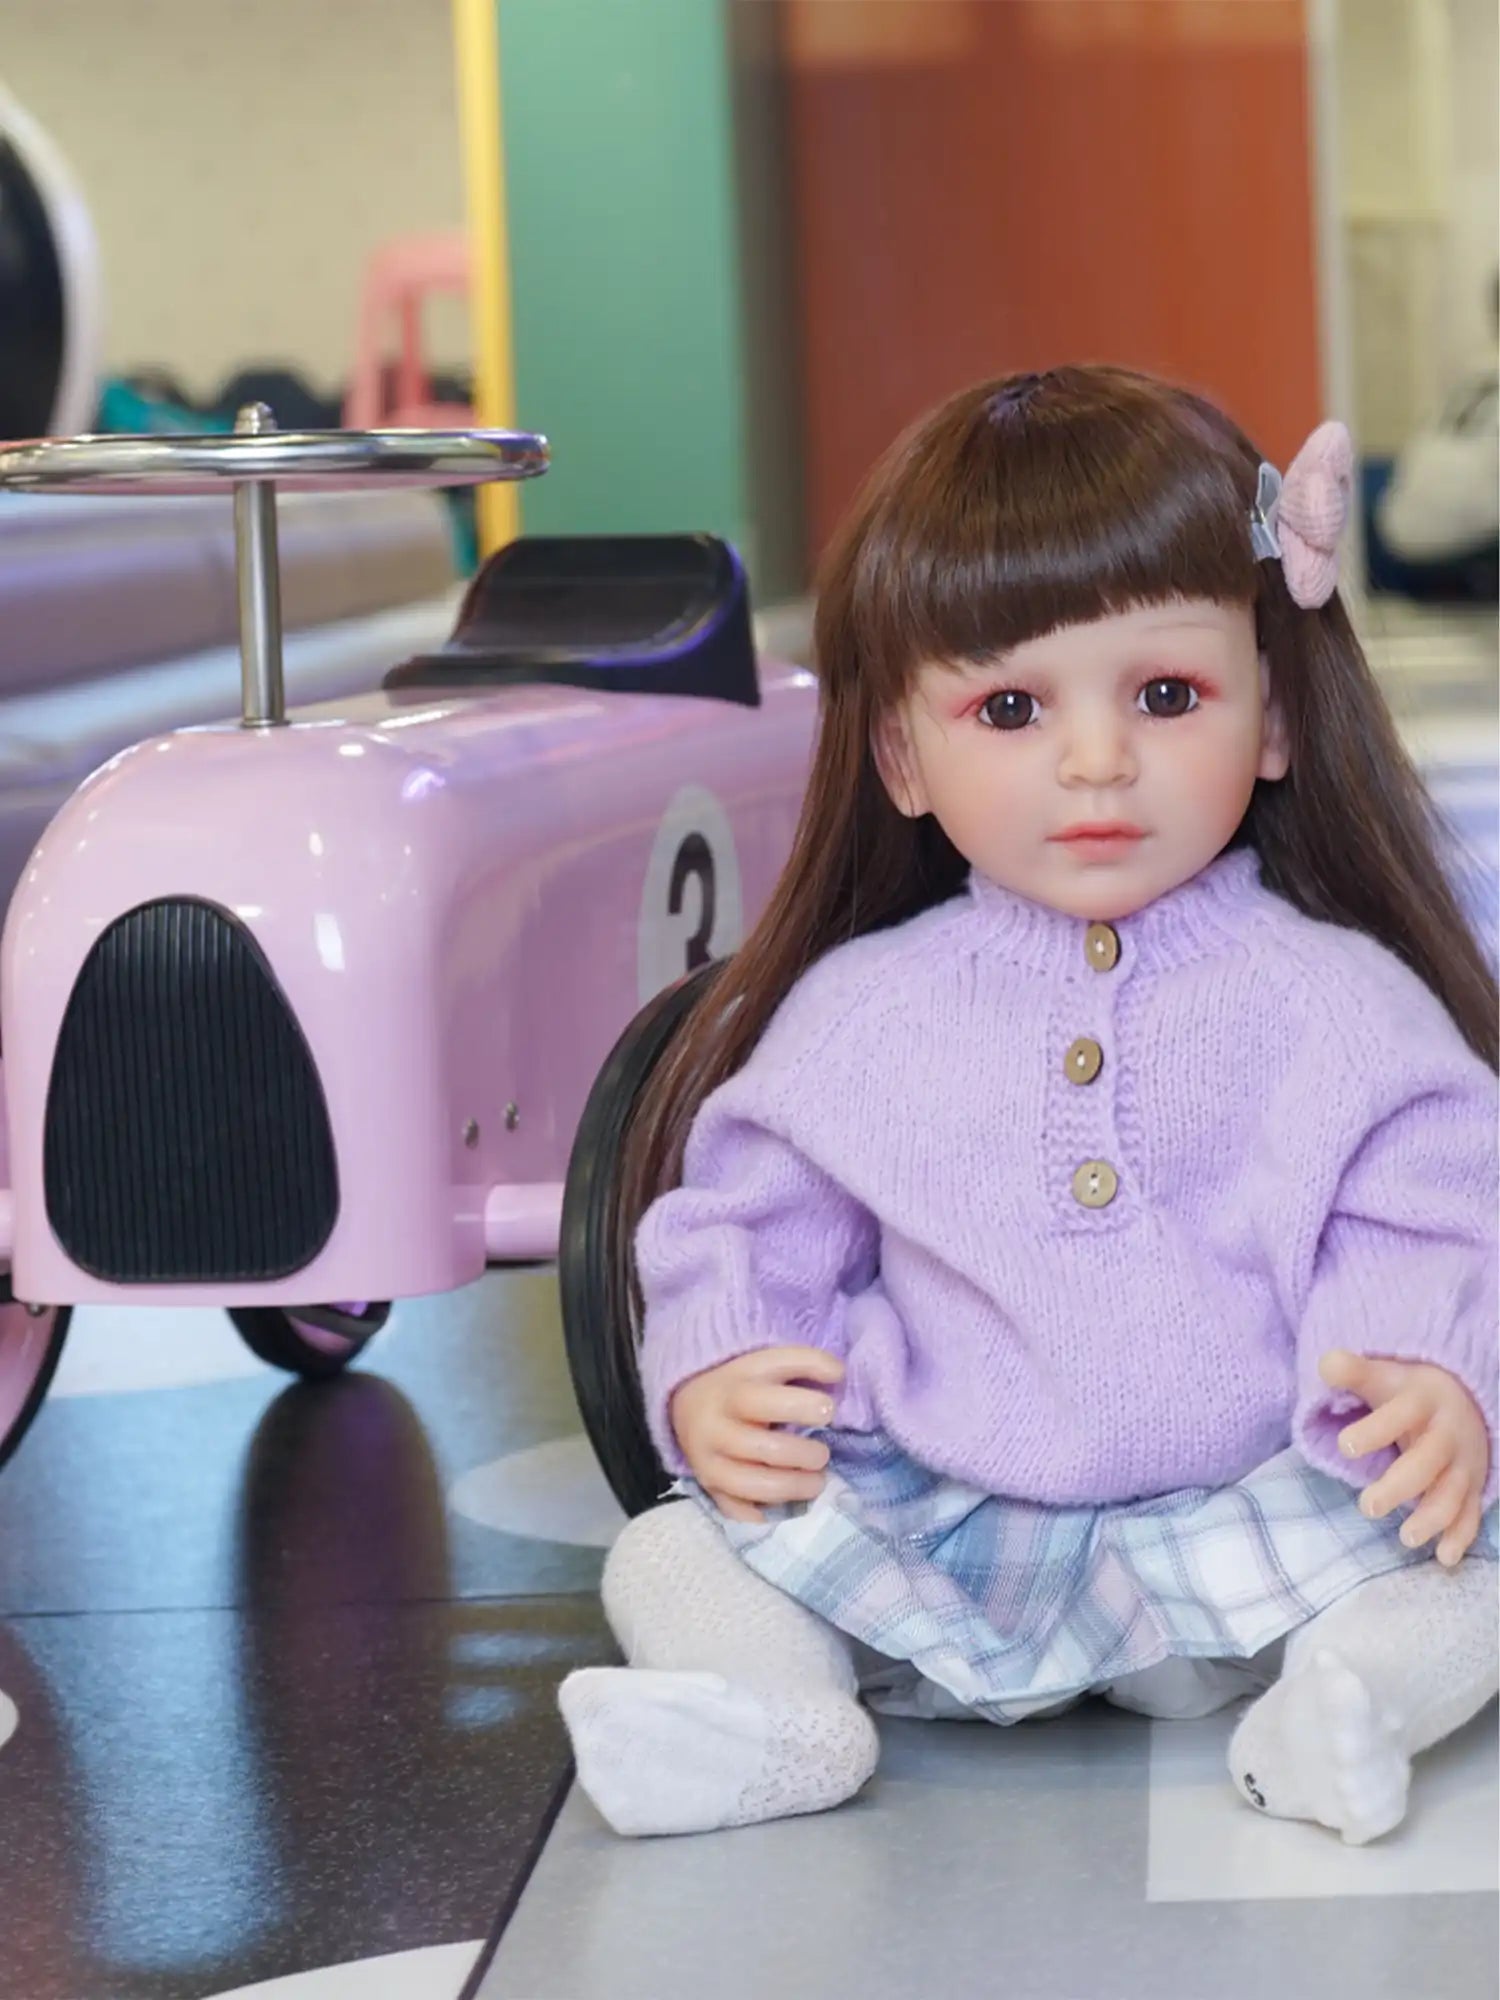 Detailed play doll featuring human-like eyes and expression, dressed in a purple top and patterned skirt, resting on the floor.